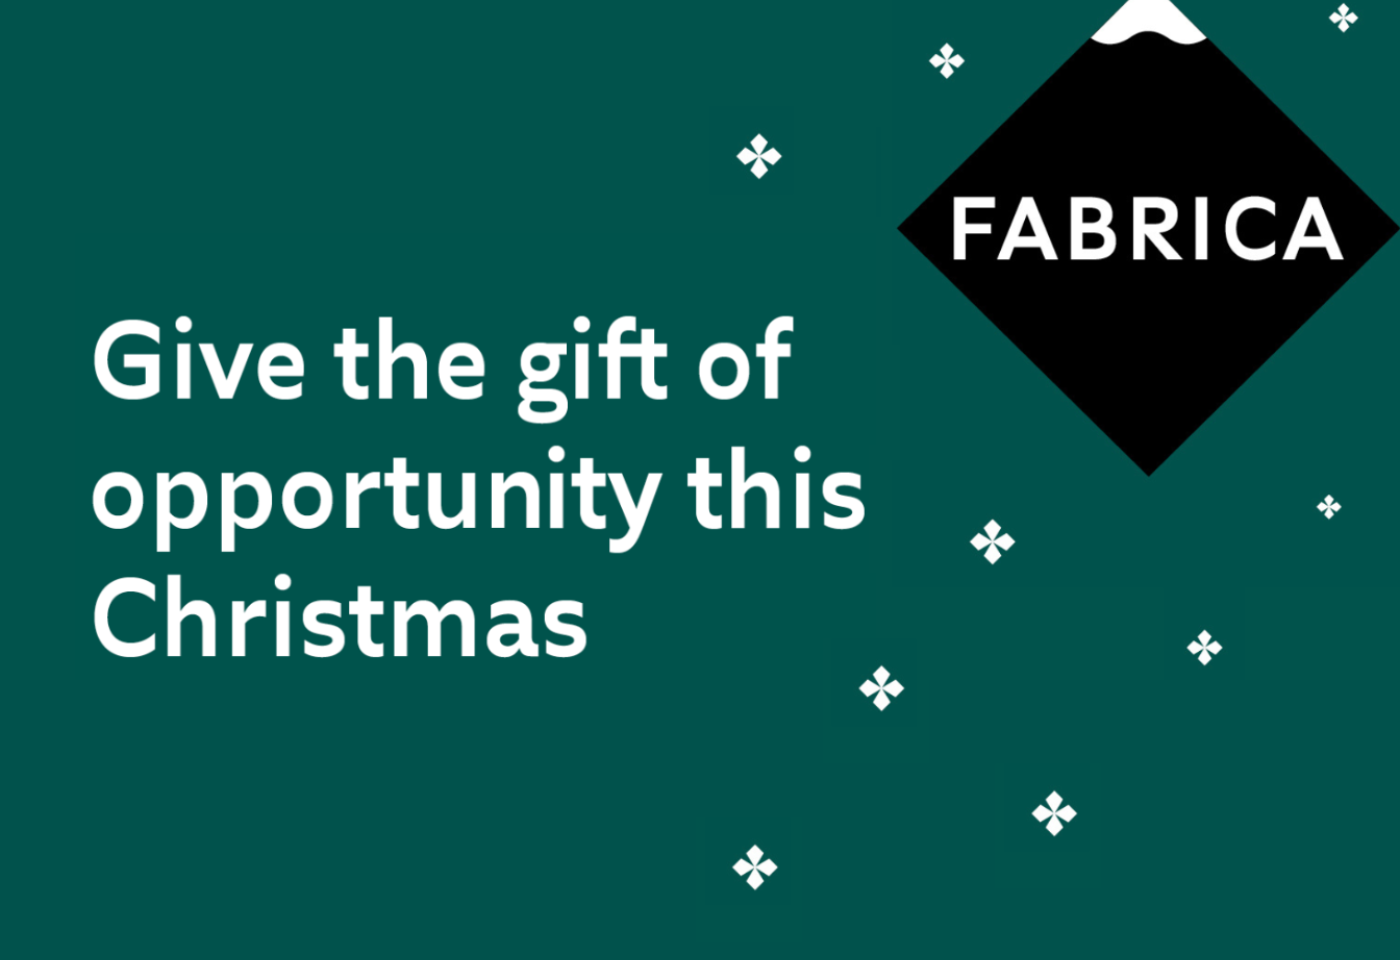 Give the gift of opportunity this Christmas